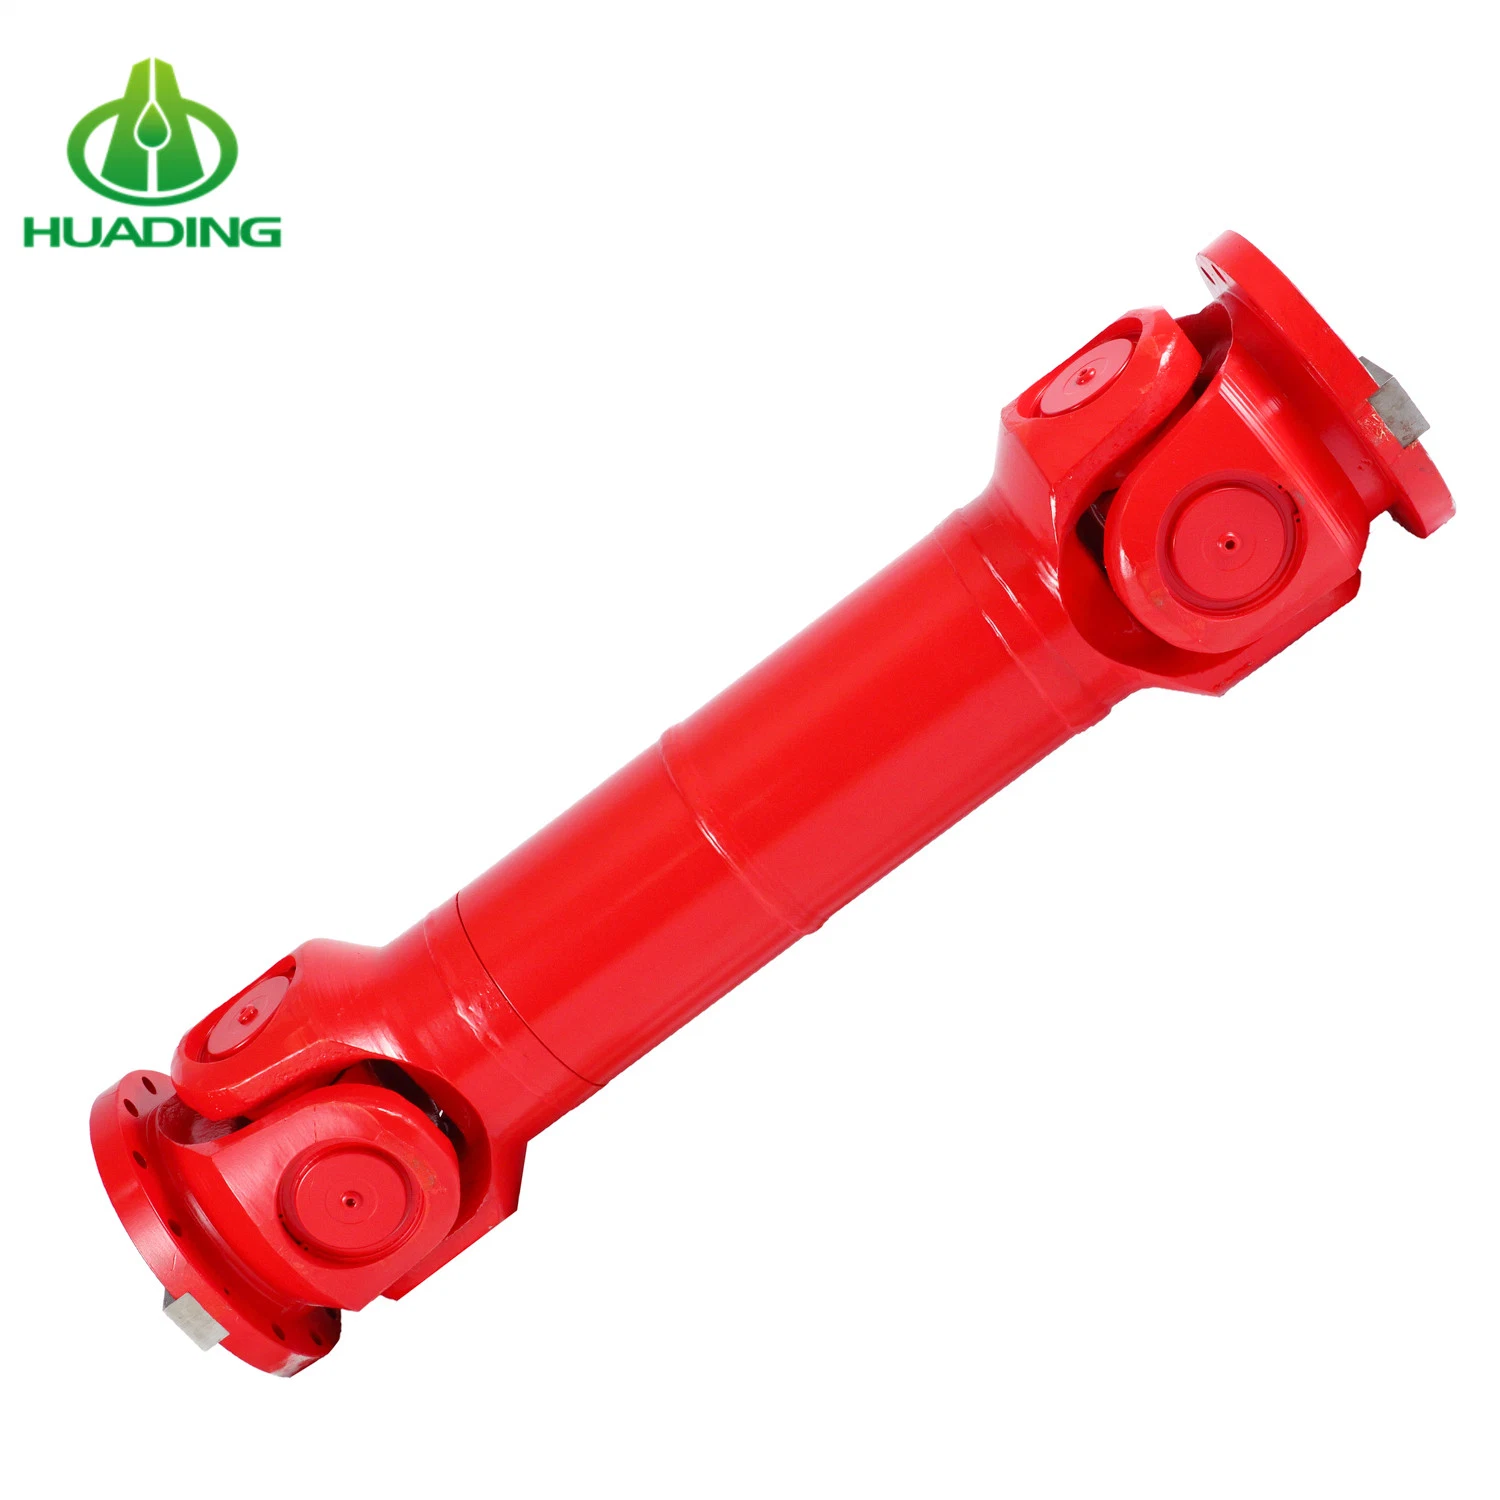 Huading SWC-Bh Types Cardan Drive Shaft for Rolling Mill, Steel Mills Industry, Paper Mill Machinery